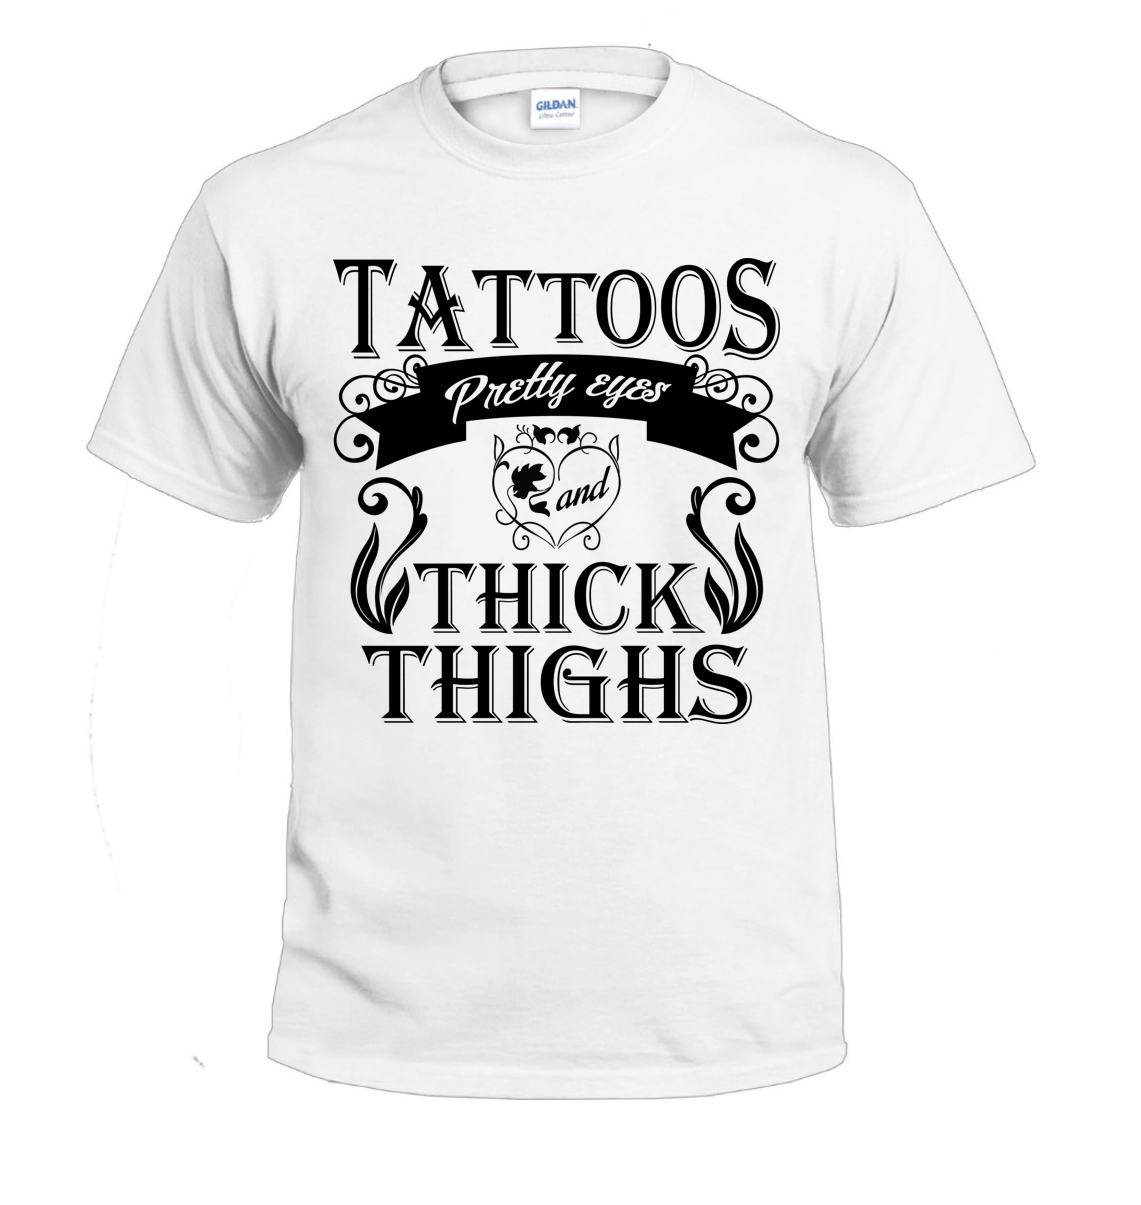 Tattoos, Pretty Eyes and Thick Thighs t-shirt